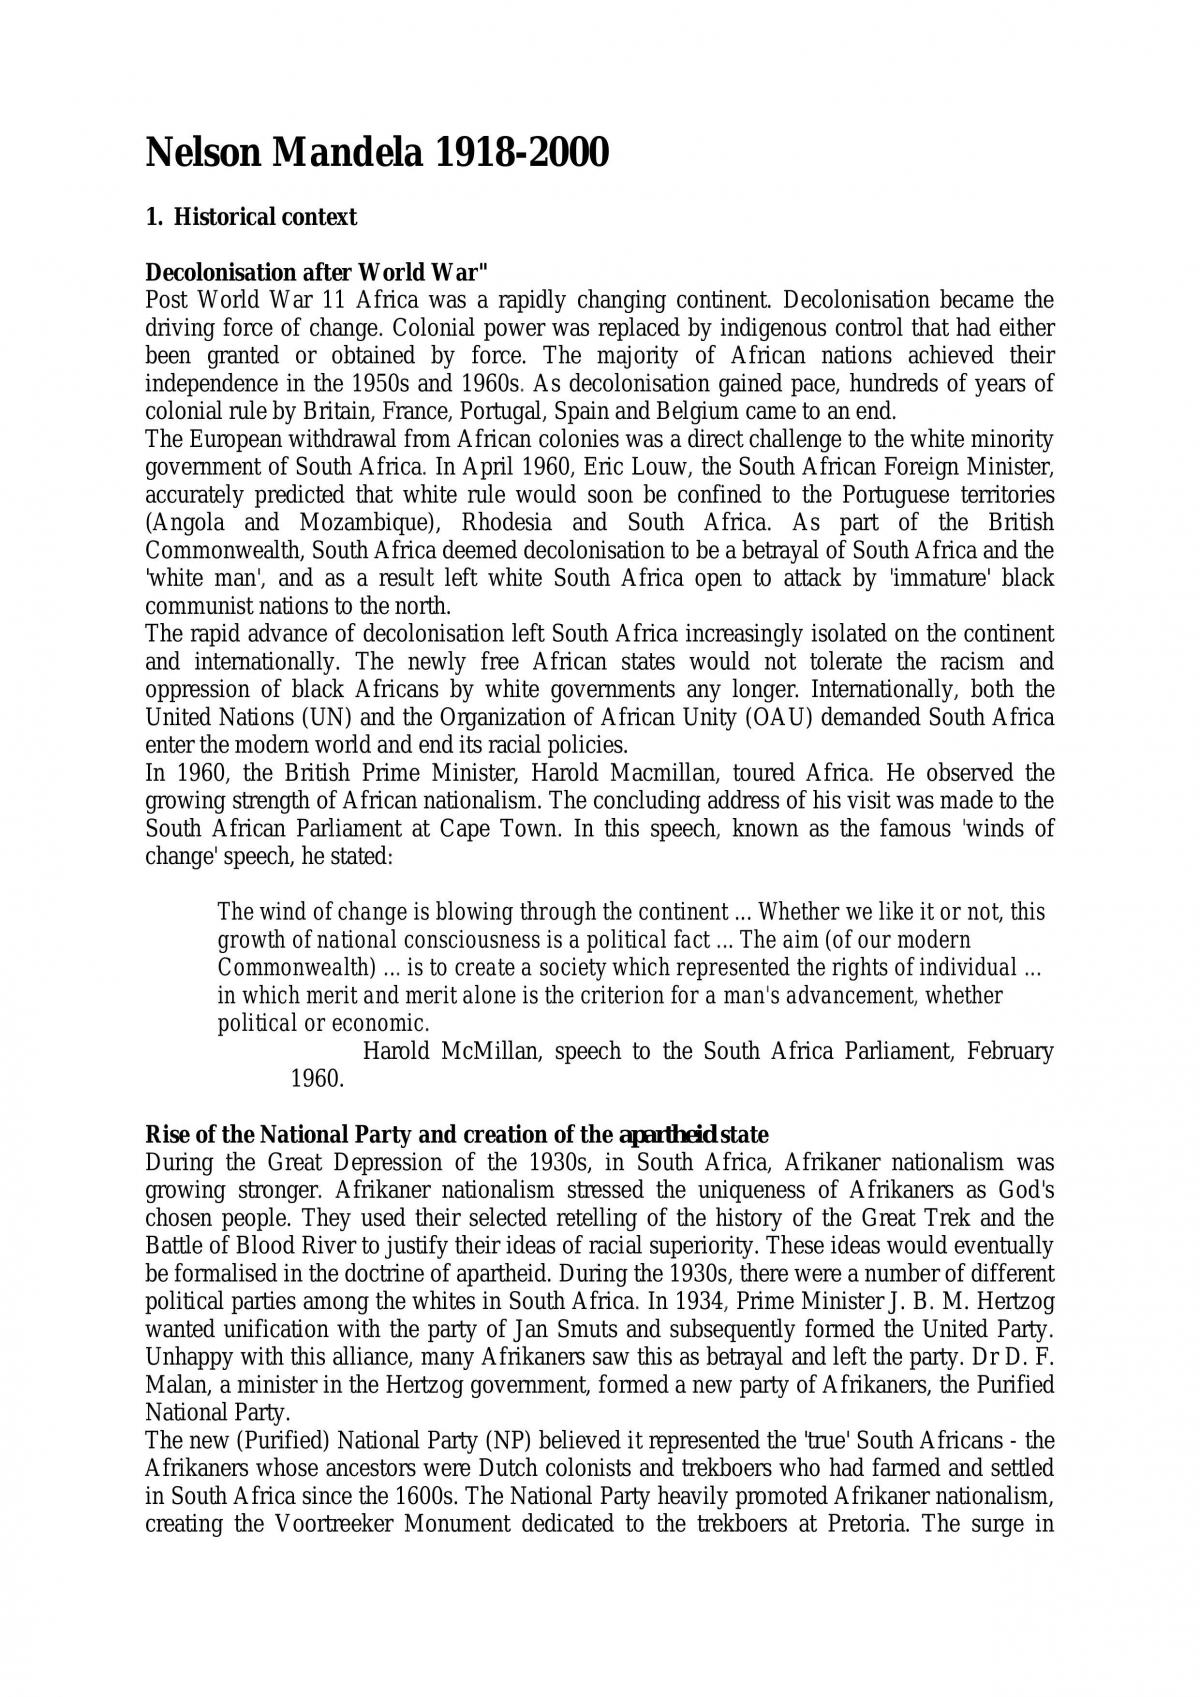 Decolonisation after World War ARTS1091 - Page 1